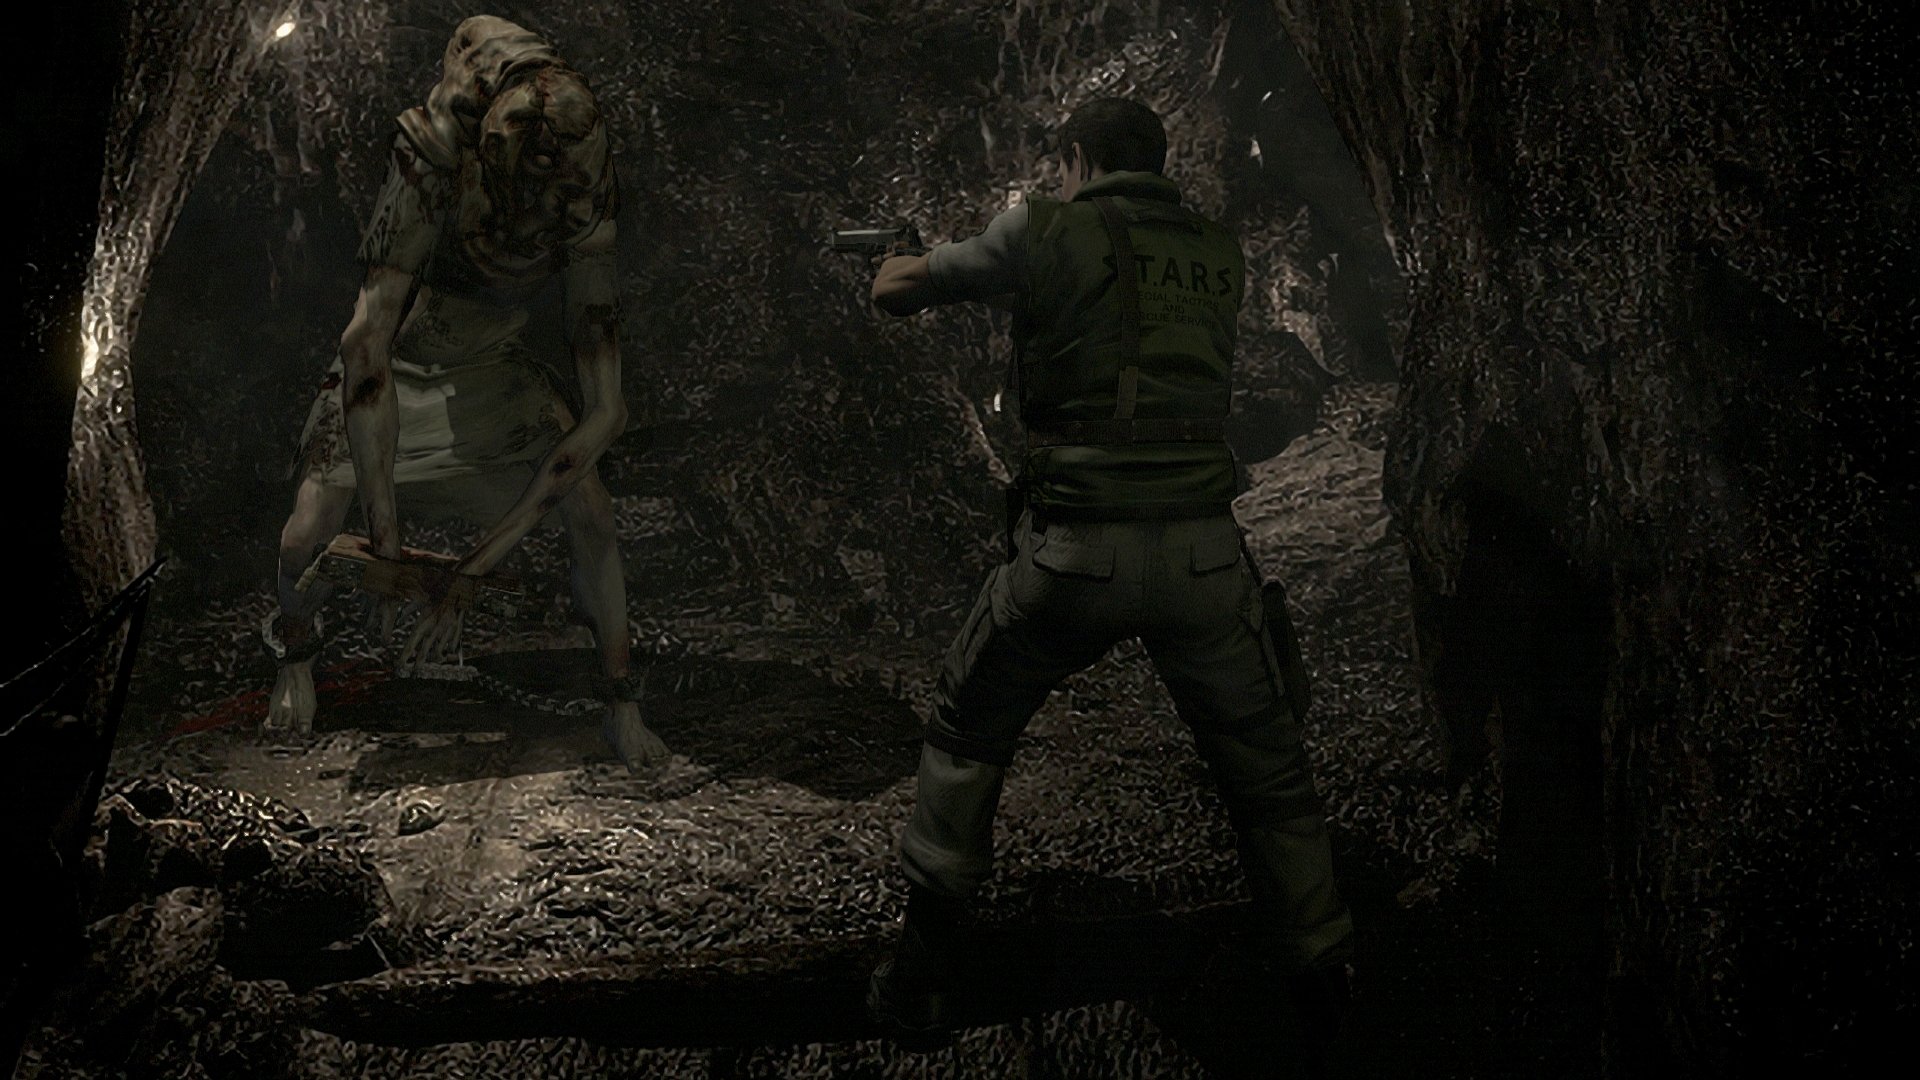 Resident Evil HD Remaster reminds us what survival-horror really is about  (review)